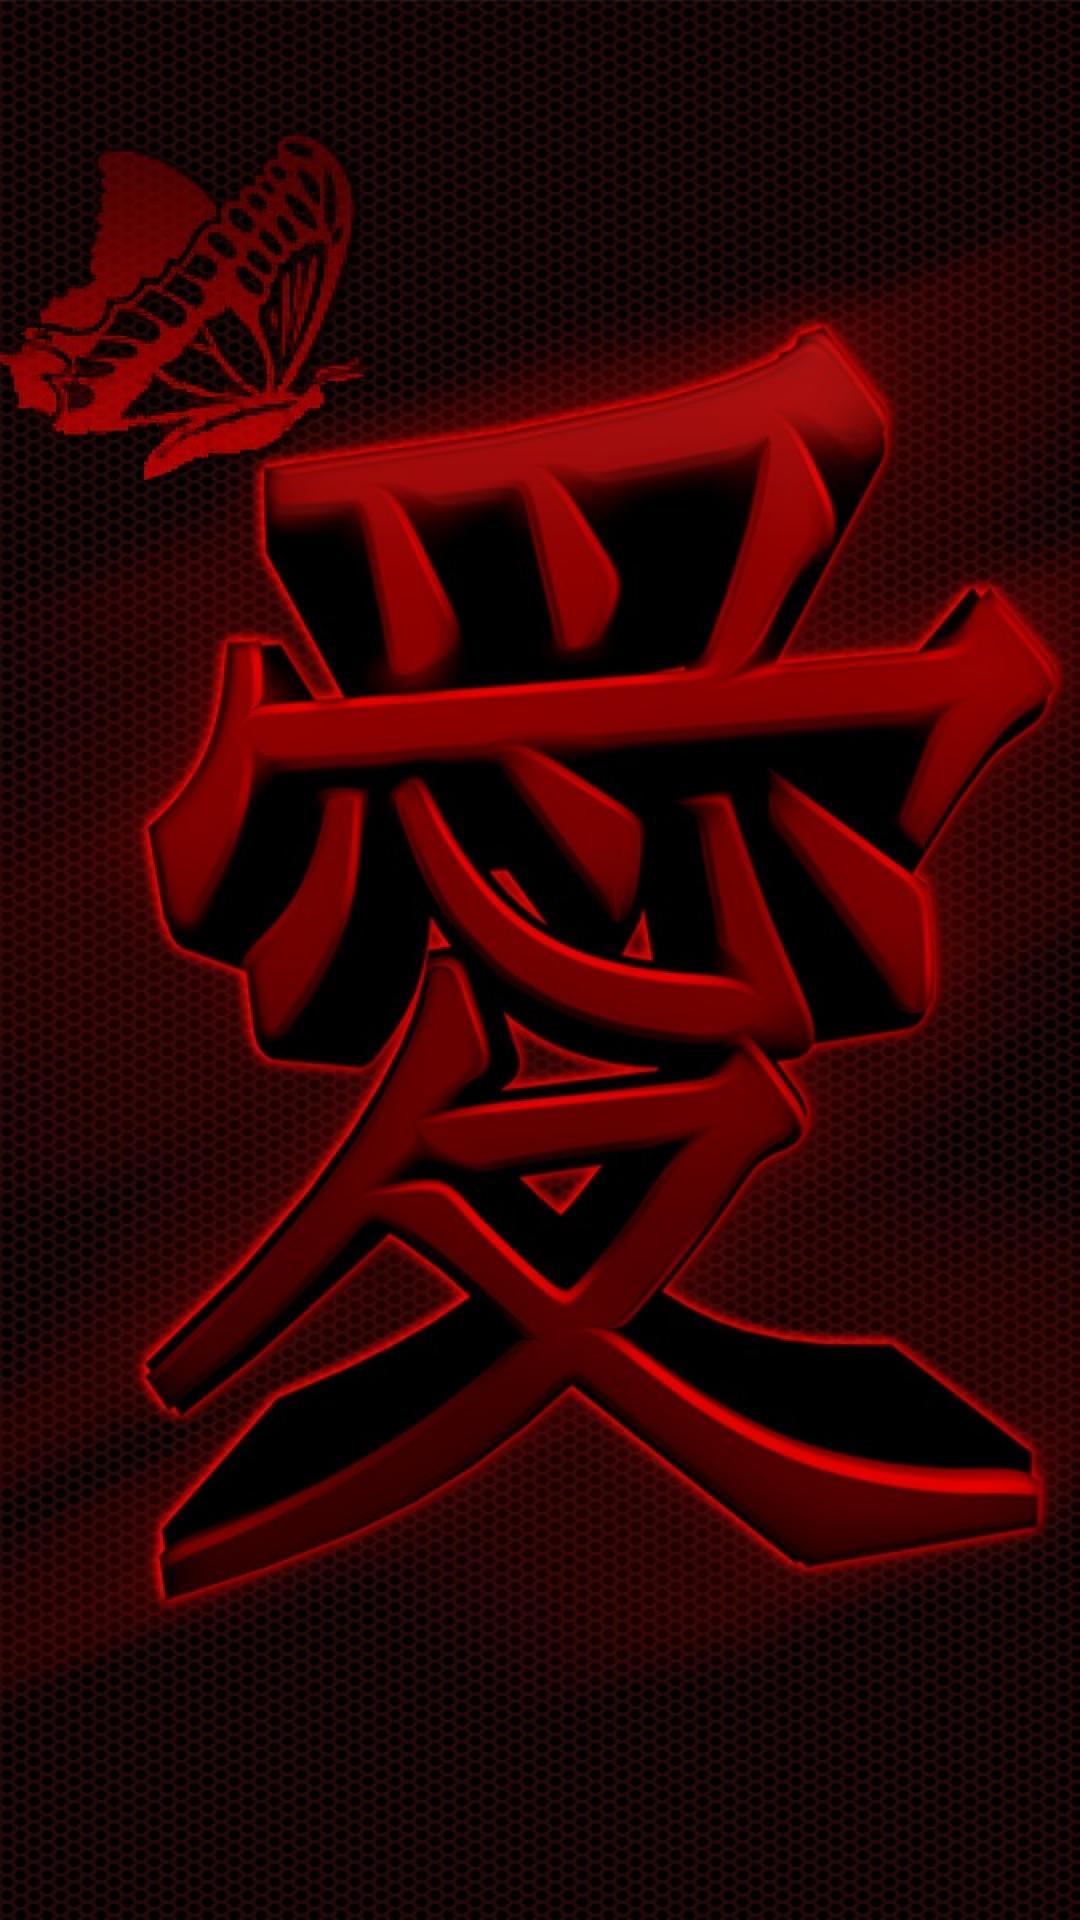 Chinese Character iPhone Wallpaper .wallpaperaccess.com